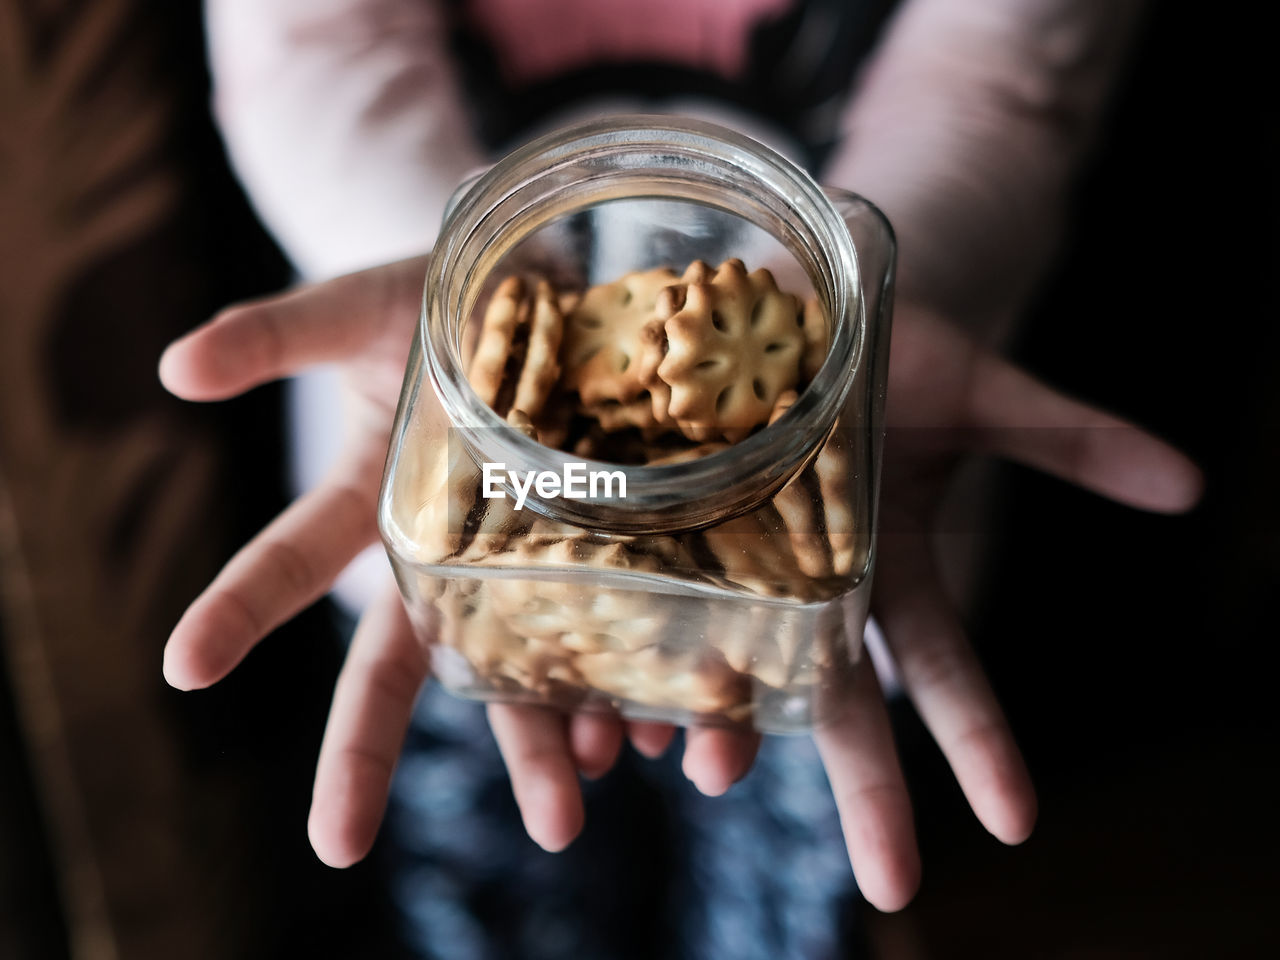 Close-up of a woman holding cookies in a glass jar